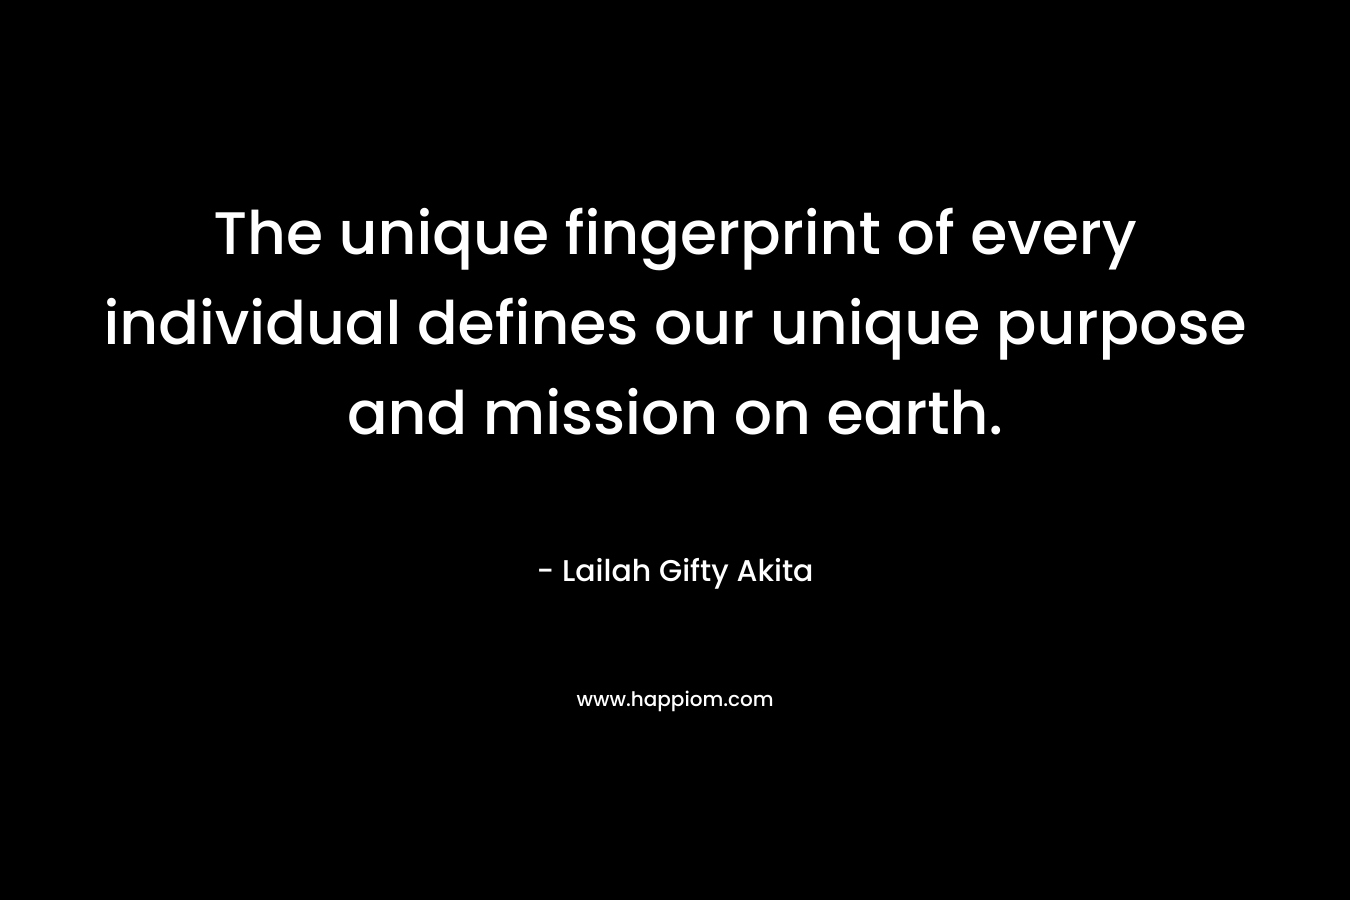 The unique fingerprint of every individual defines our unique purpose and mission on earth.